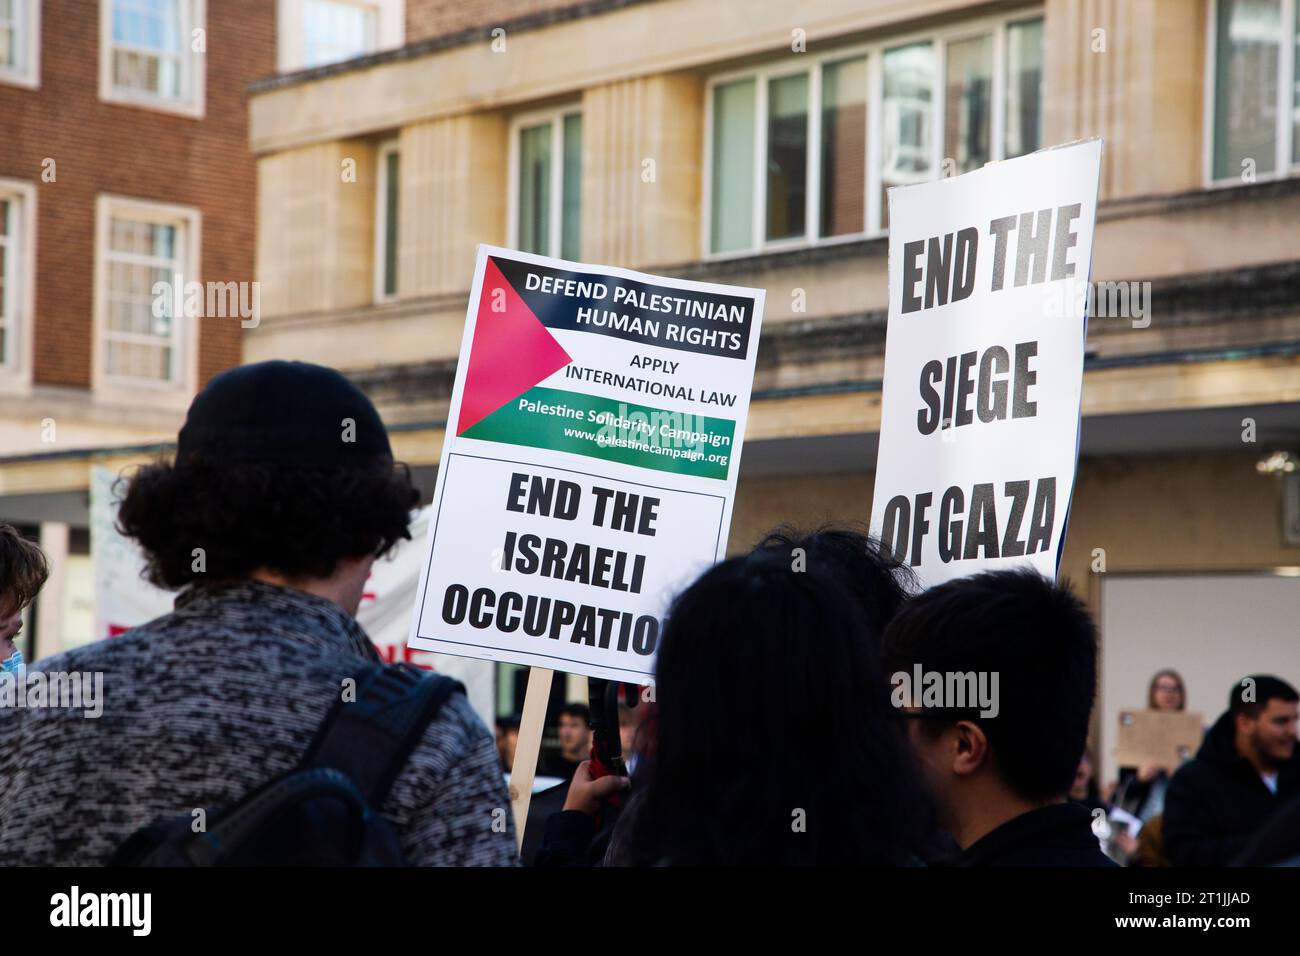 Free Palestine protest close up of signage in crowd reading End the Israel occupation / end the siege of Gaza Stock Photo